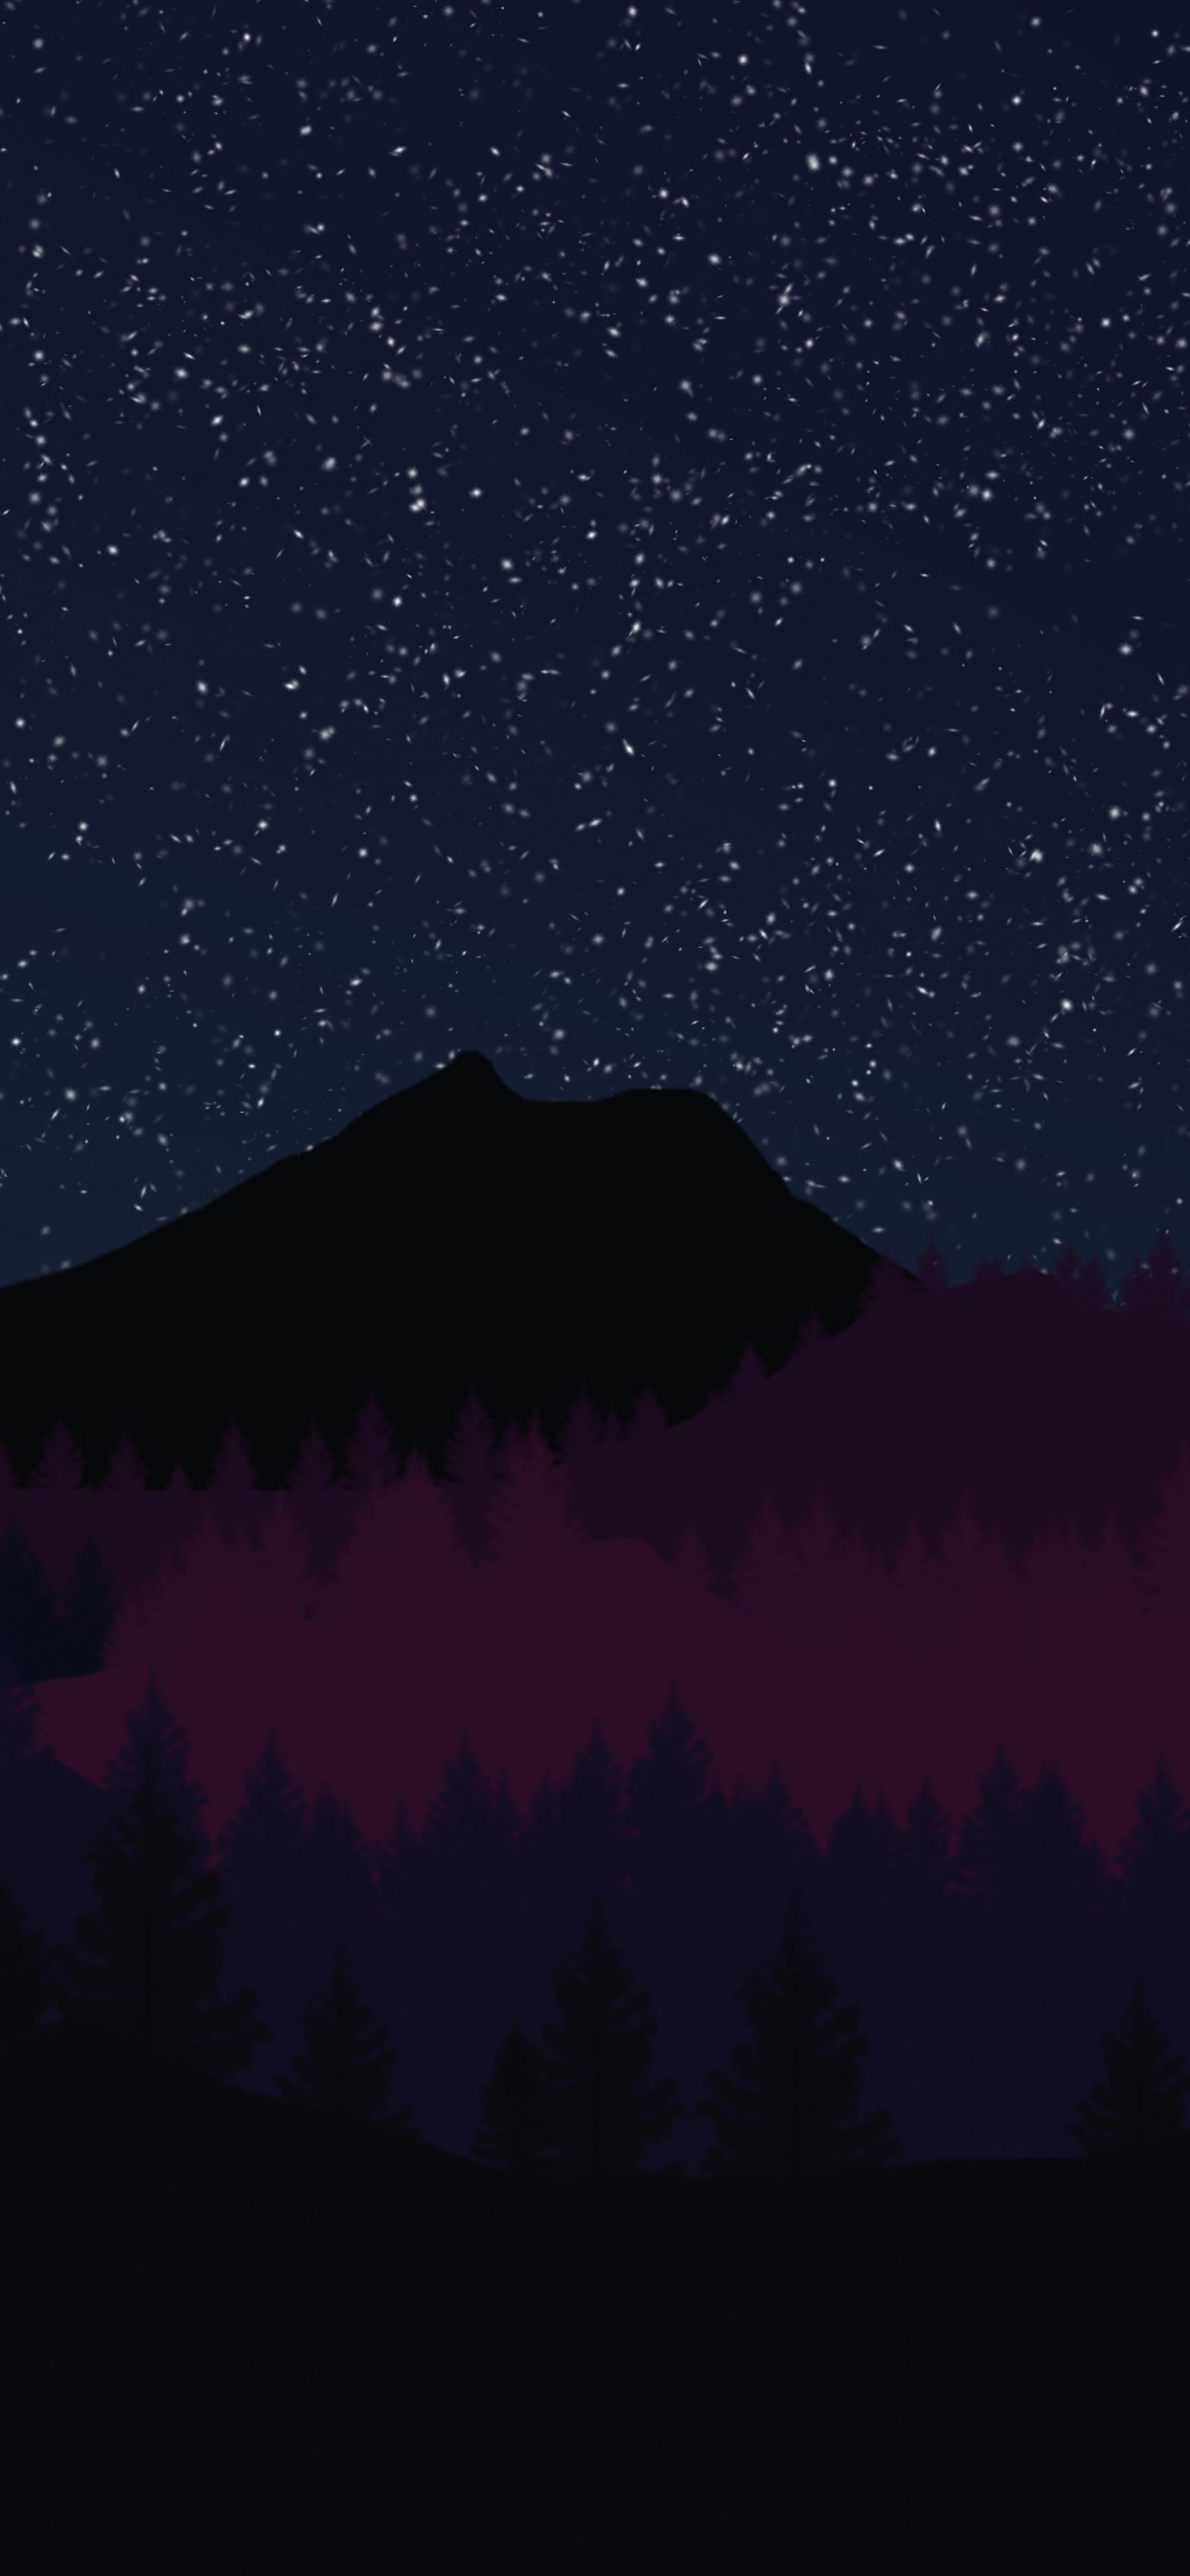 Silhouette of Trees Under Starry Night. Wallpaper in 1242x2688 Resolution